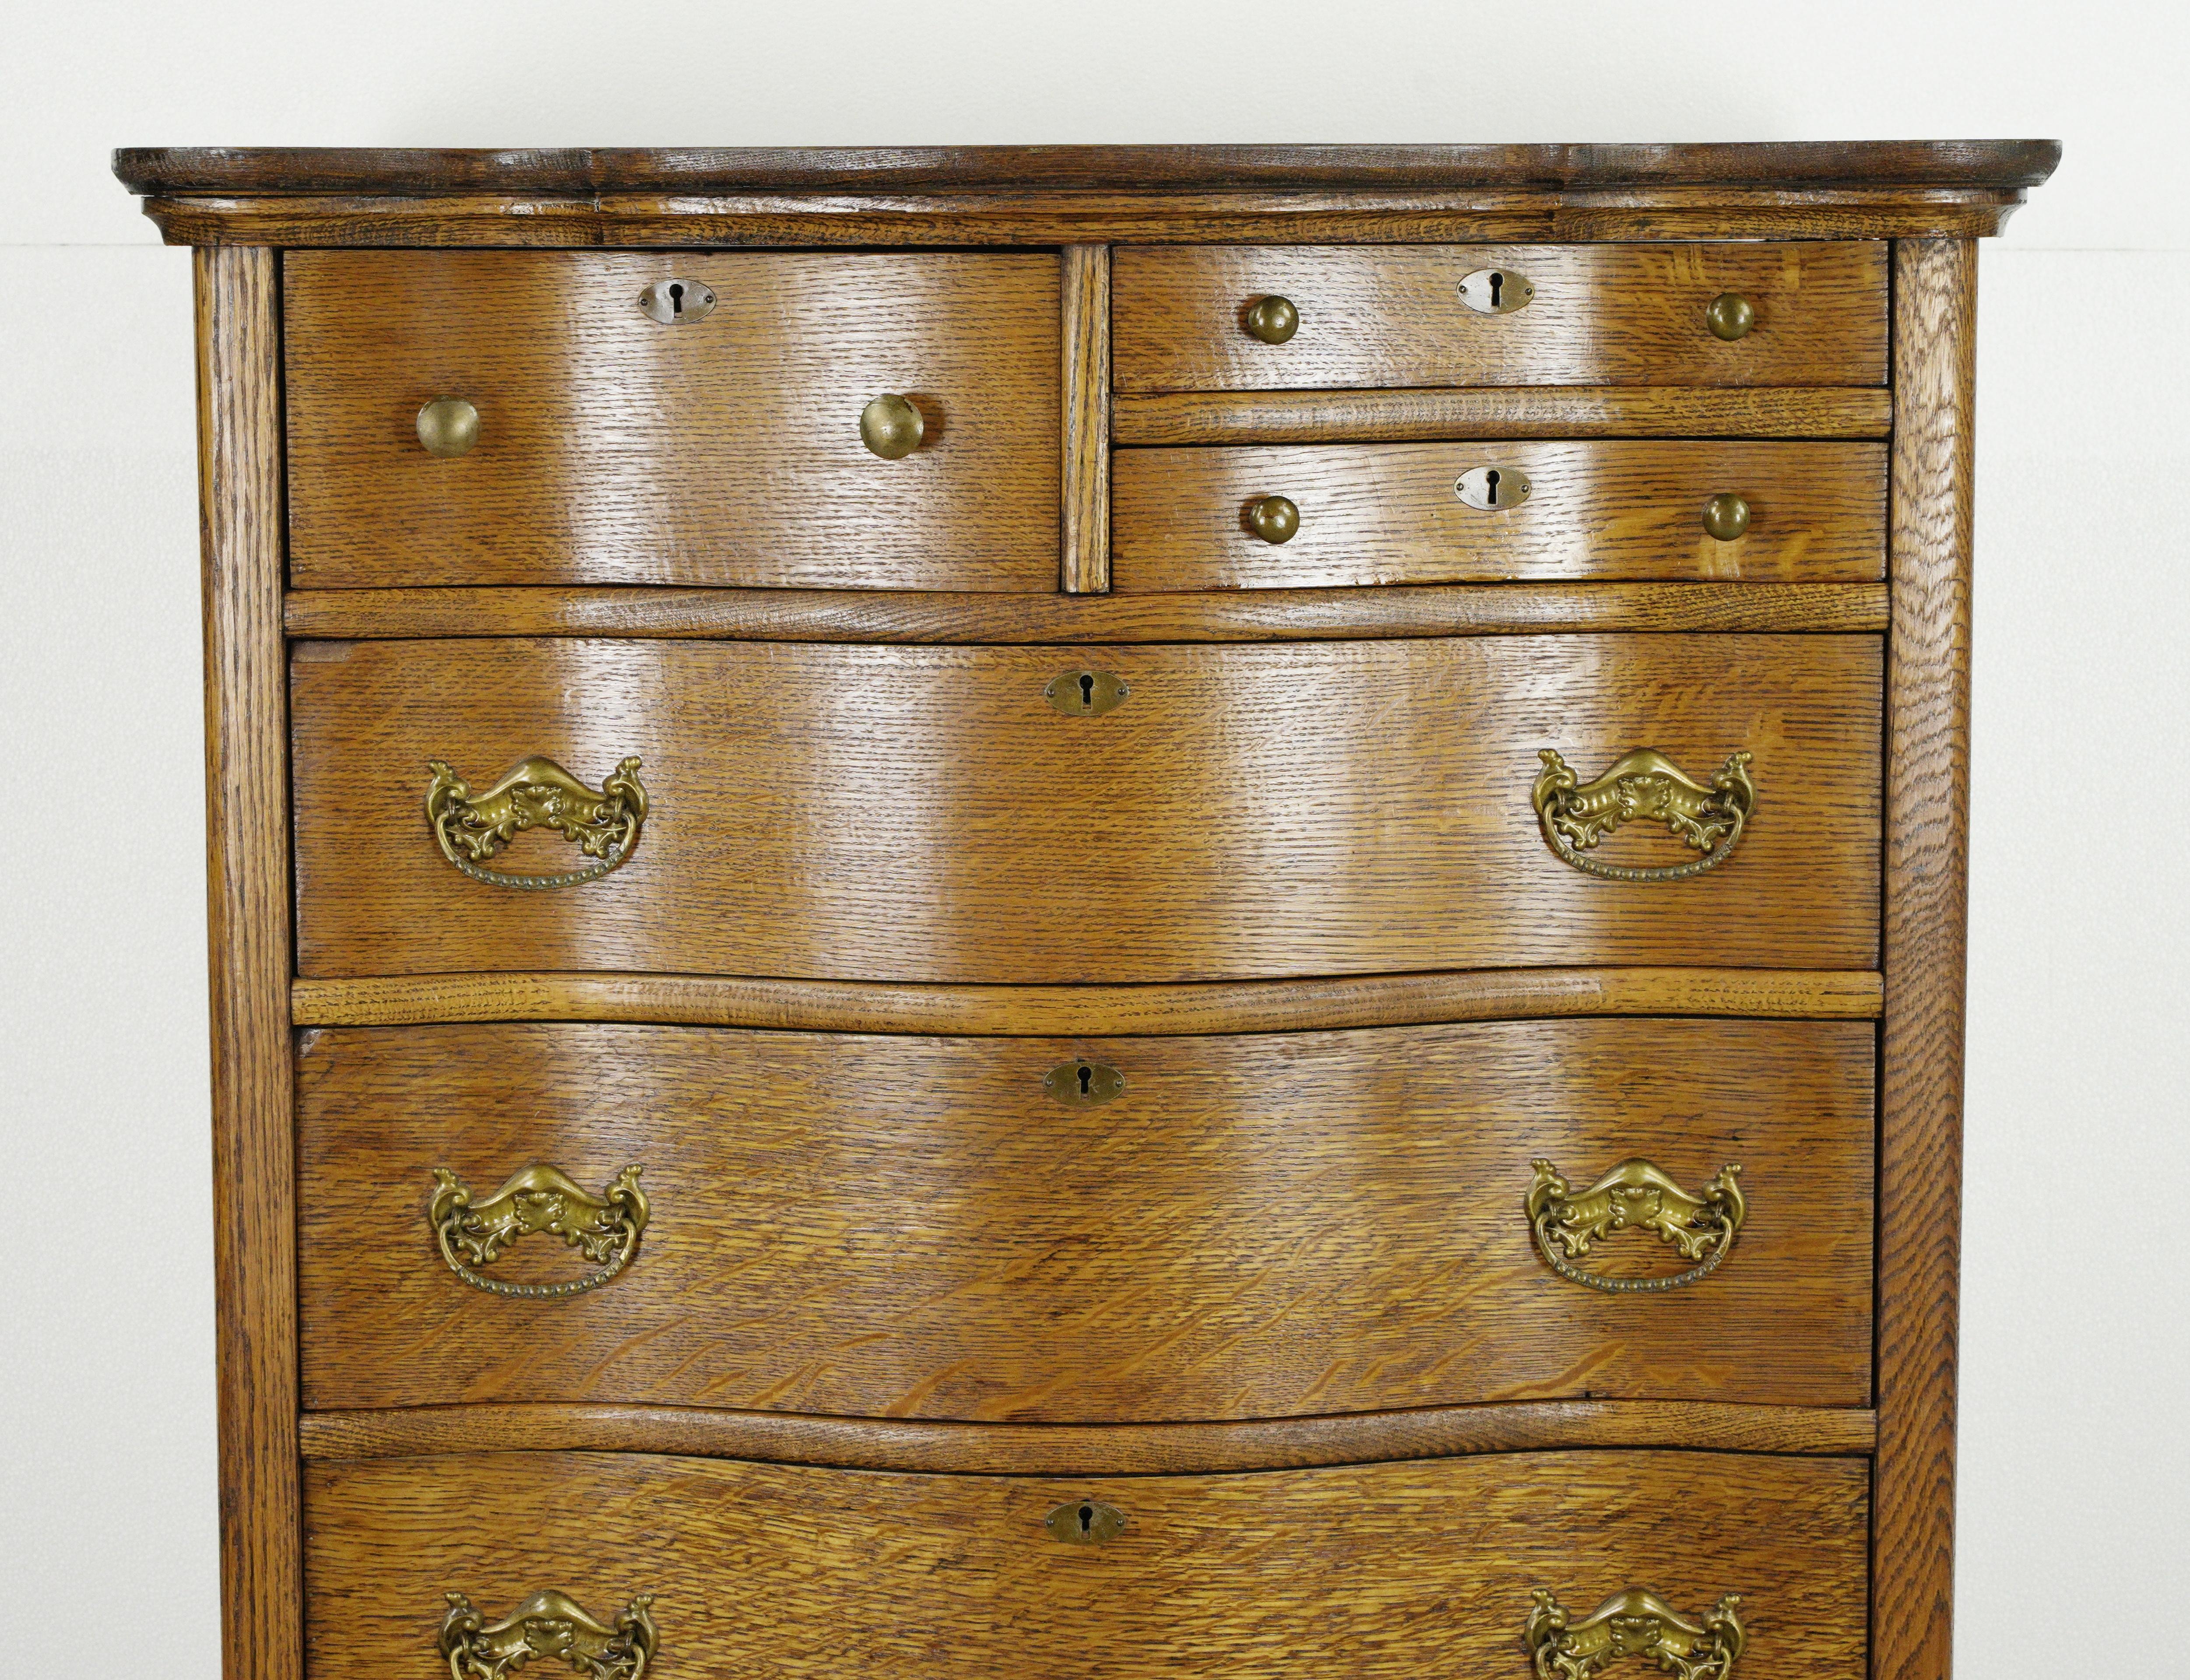 Restored antique oak serpentine front tall dresser with an unusual three upper drawer configuration and four bottom large drawers. This has all the original hardware and casters. This piece was restored in our shop. Good condition with appropriate